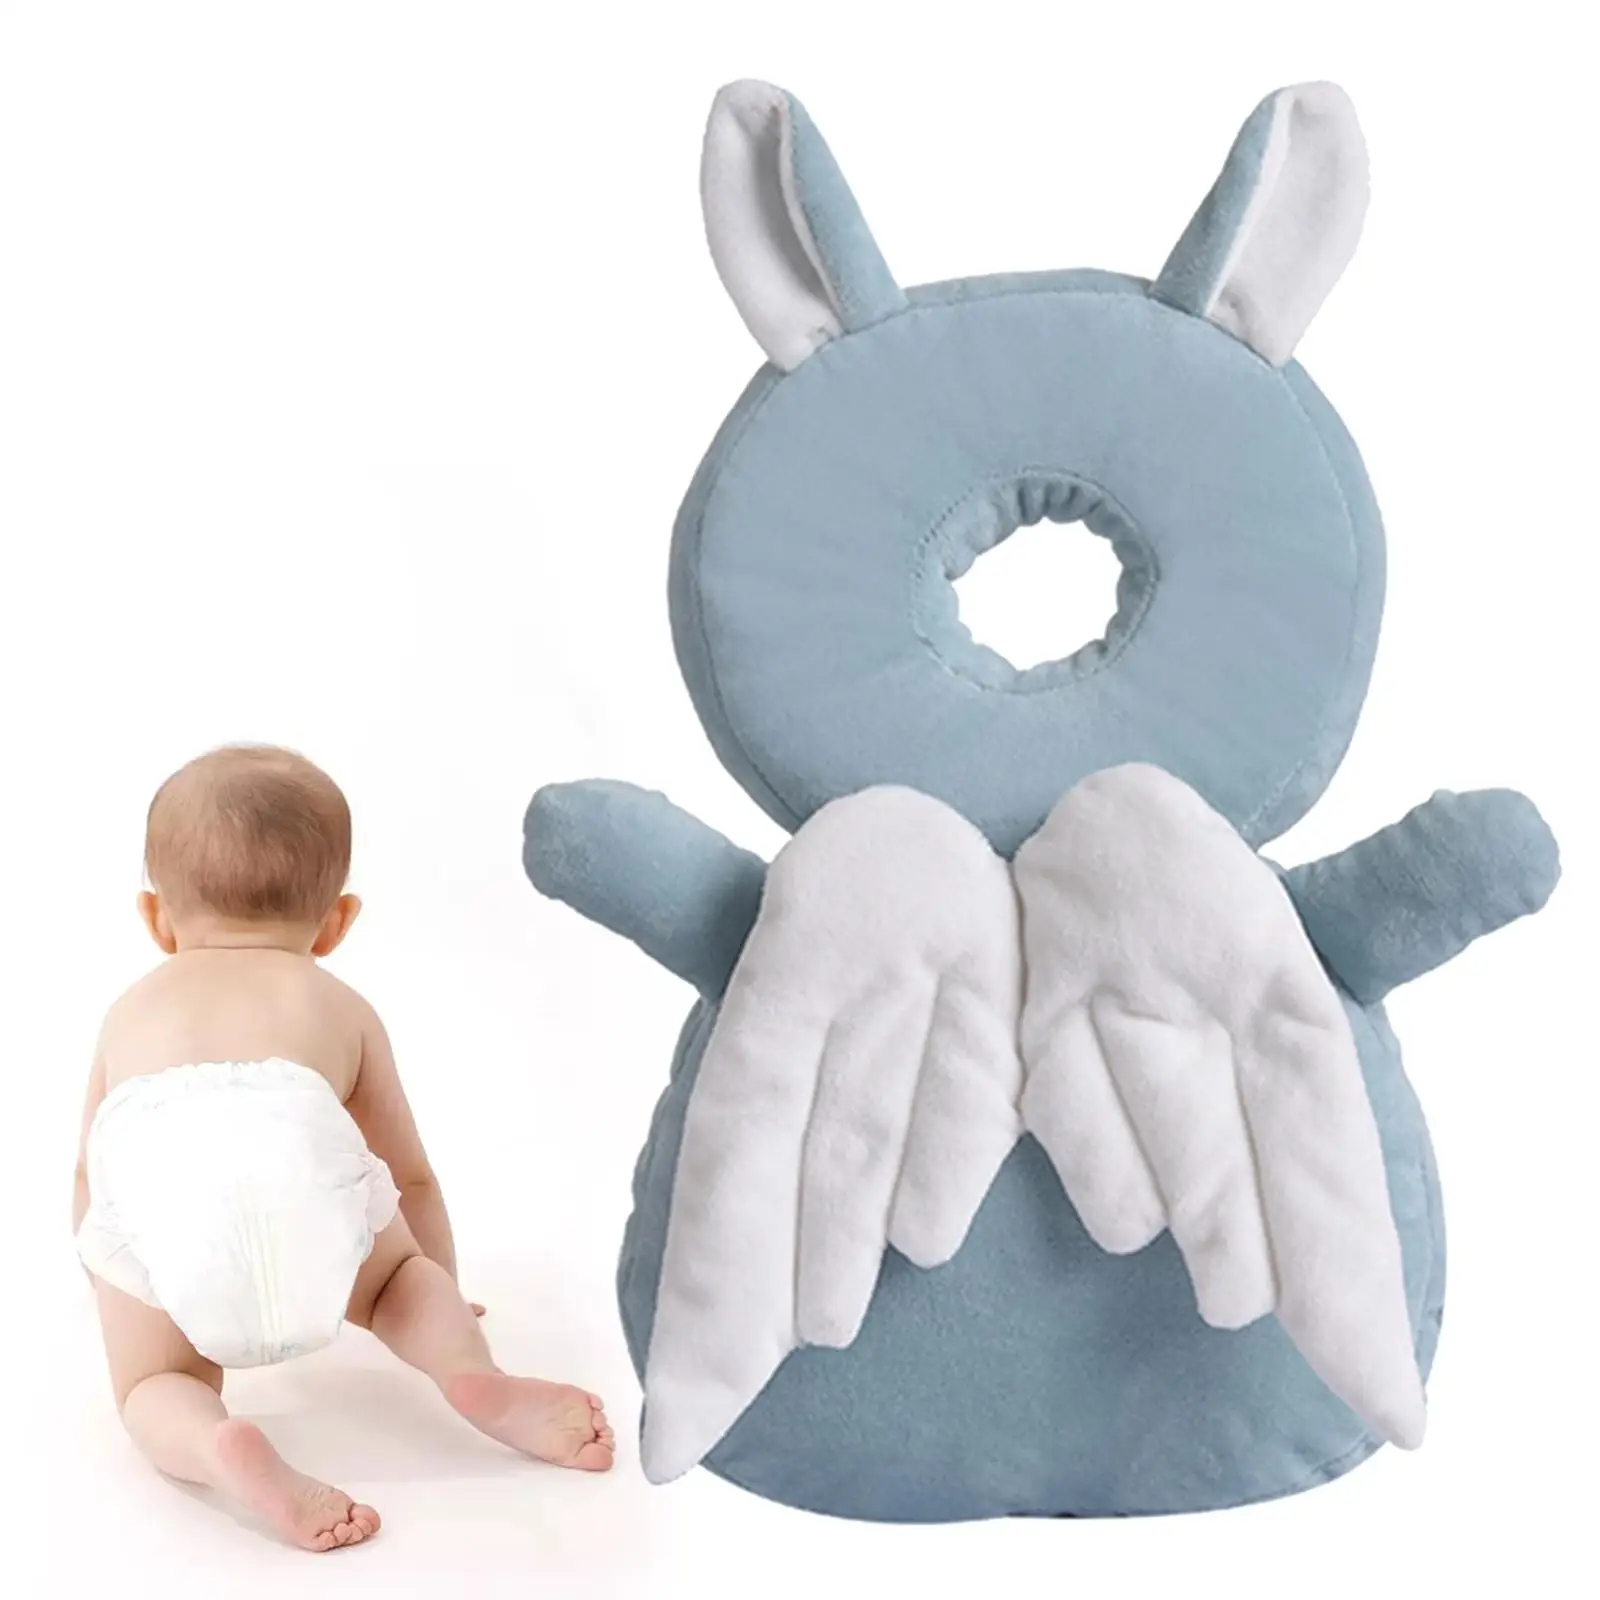  Head  Cushion Head  Baby ive Walking Crawling  for Toddler 5 Months Infant